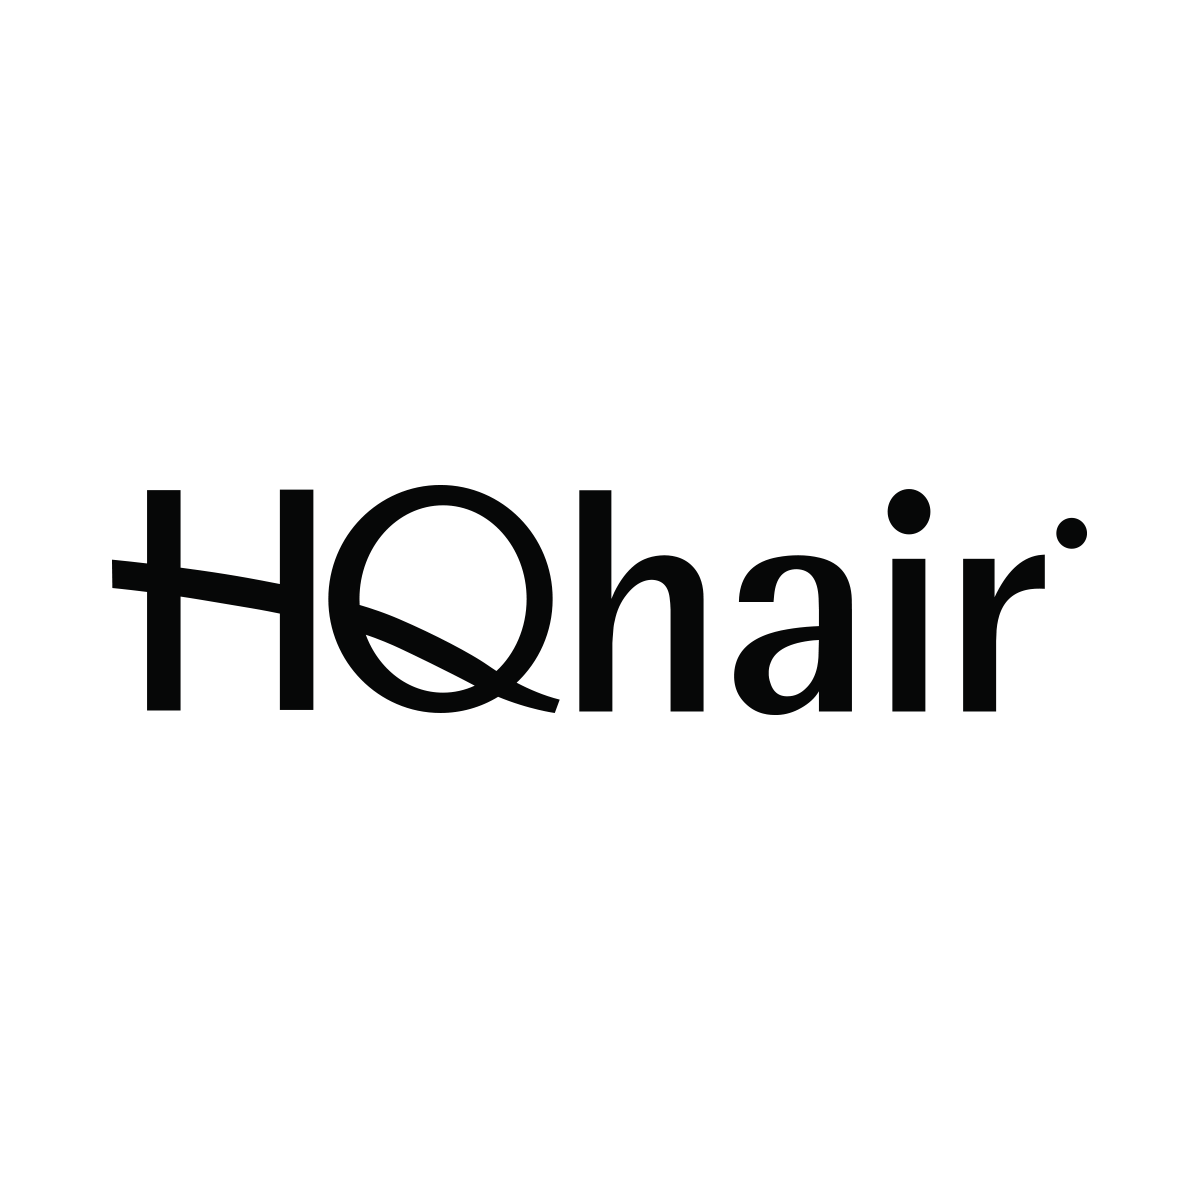 20% Off With HQhair Voucher Code